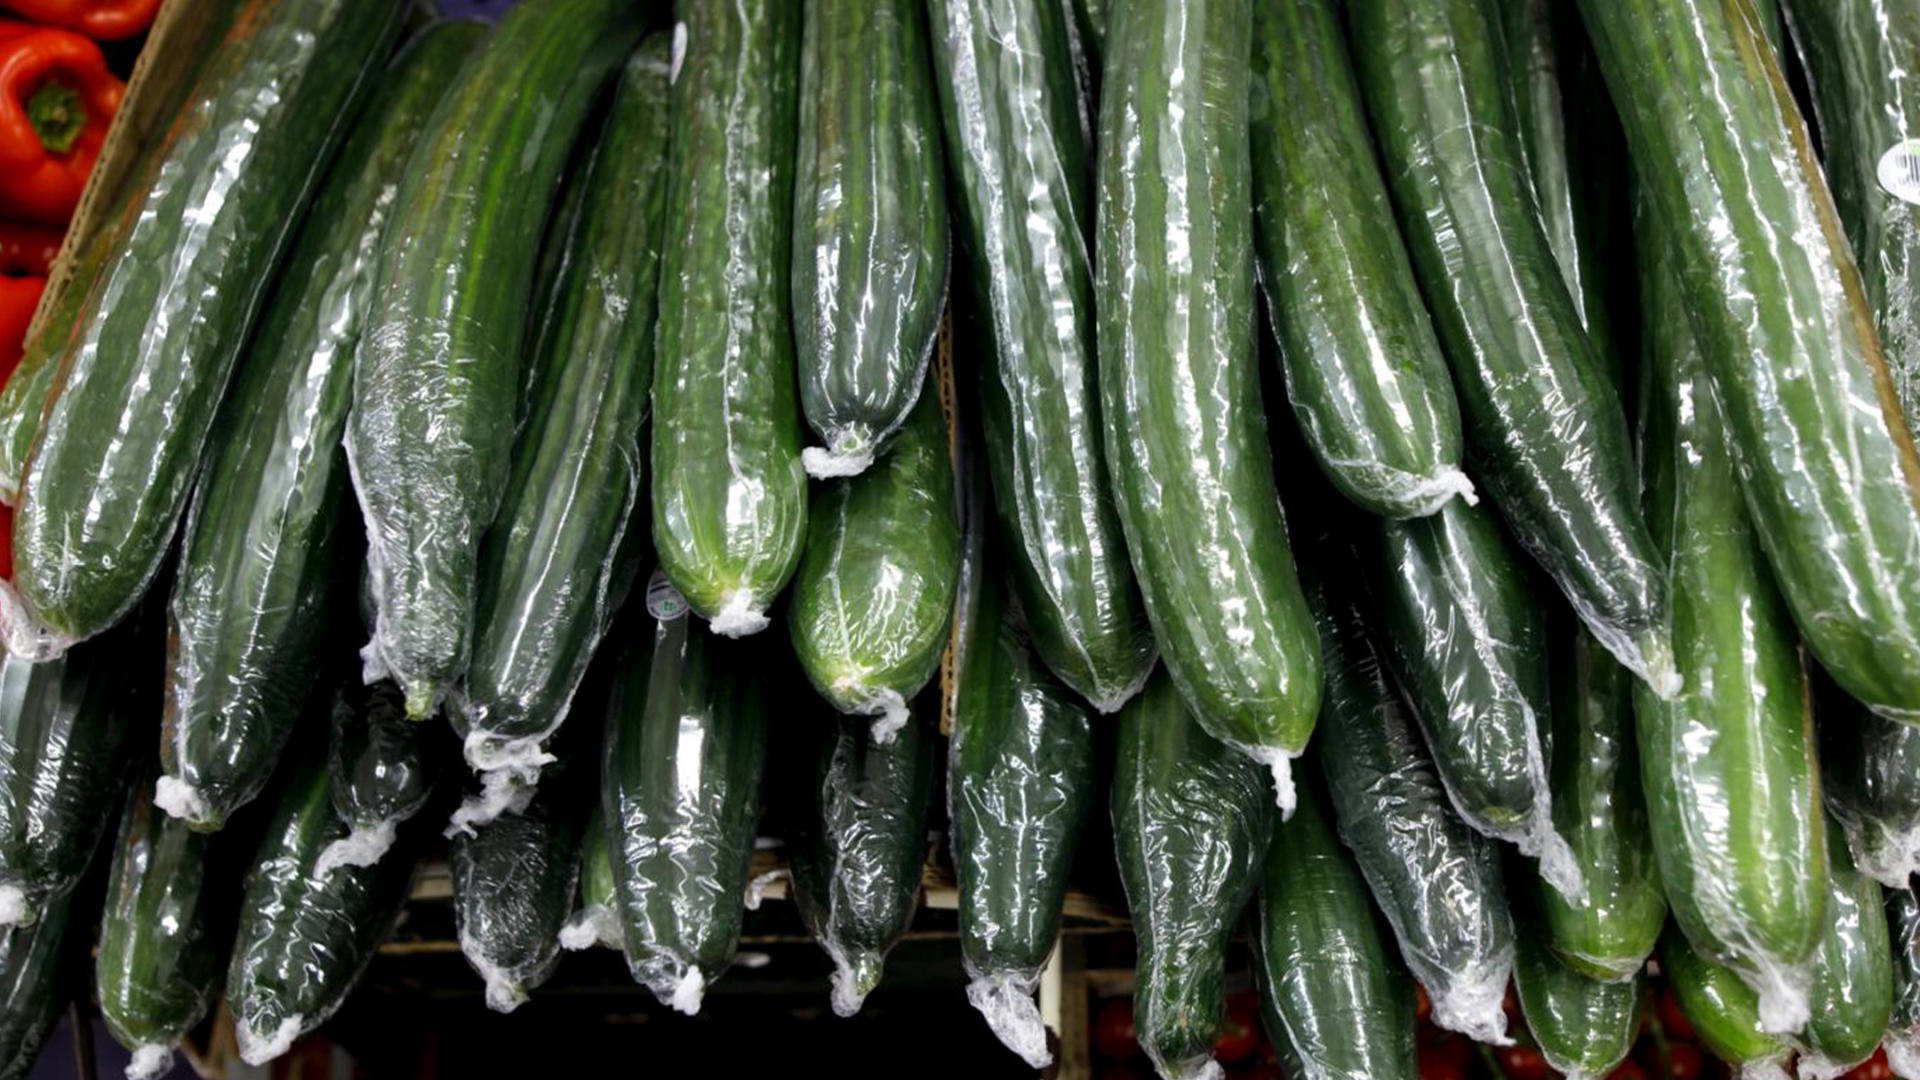 Stacked cucumbers wrapped in plastic